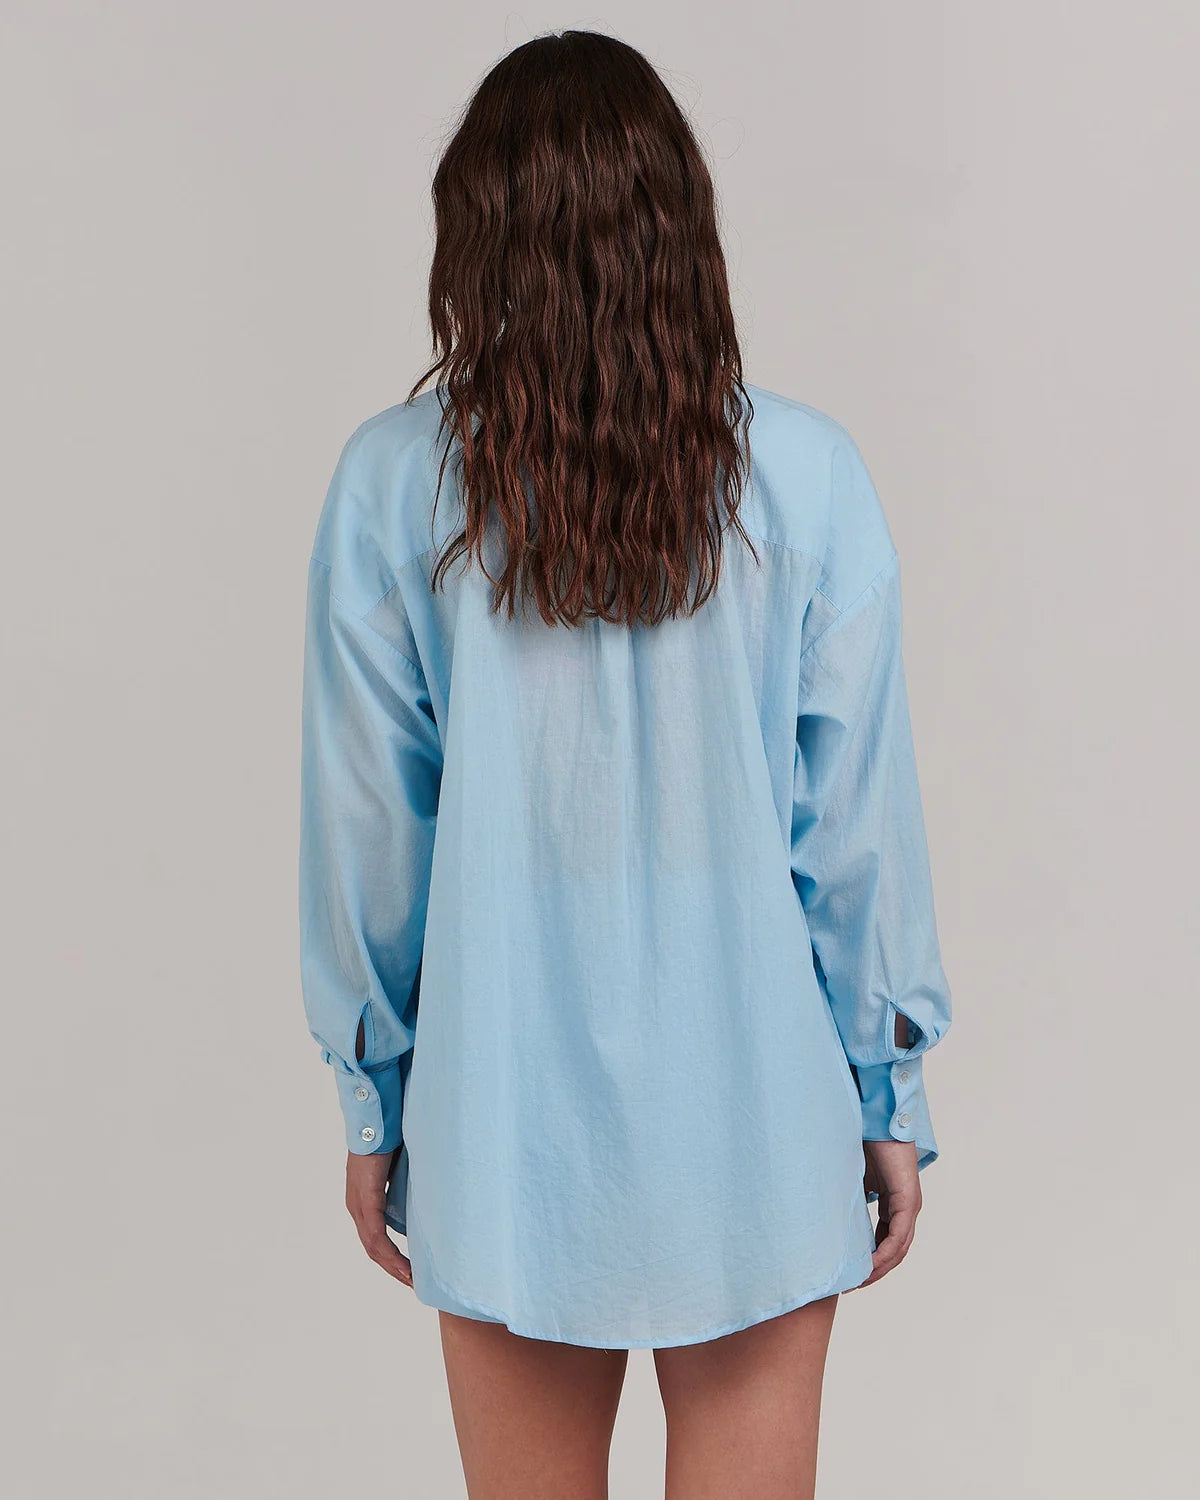 This gorgeous shirt by Charlie Holiday features a softly tailored design in a soft sky blue hue. Work it back with the coordinating Casey short for an elegant loungewear look.